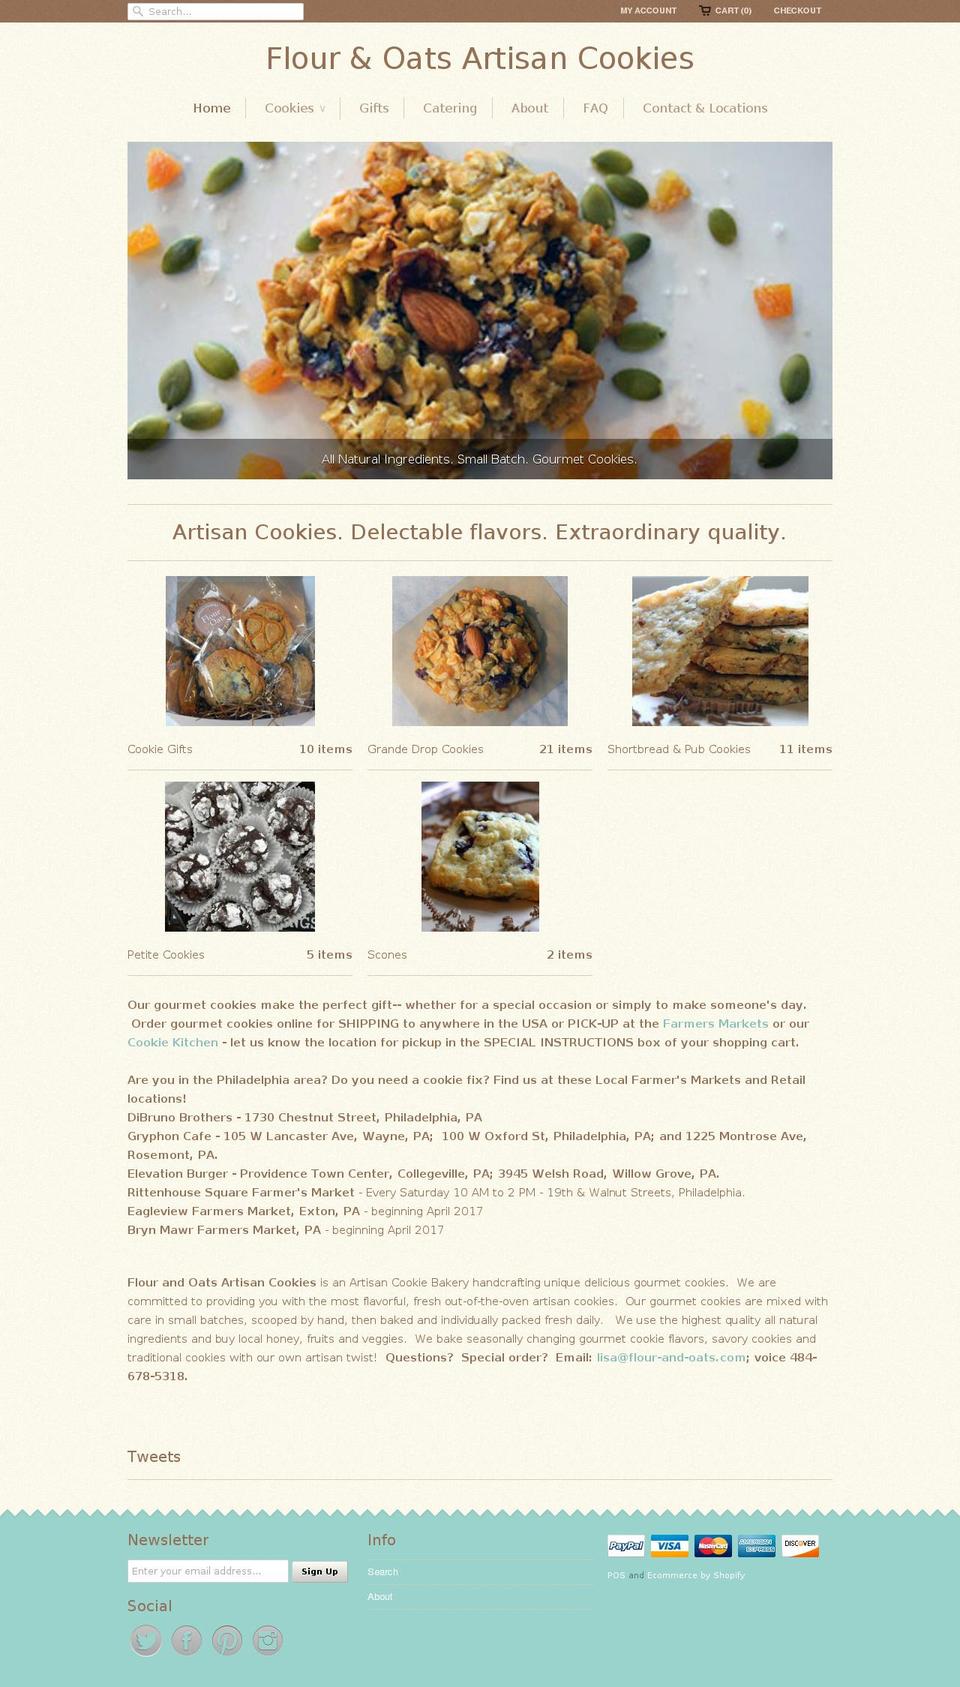 Andaman Shopify theme site example flour-and-oats.com